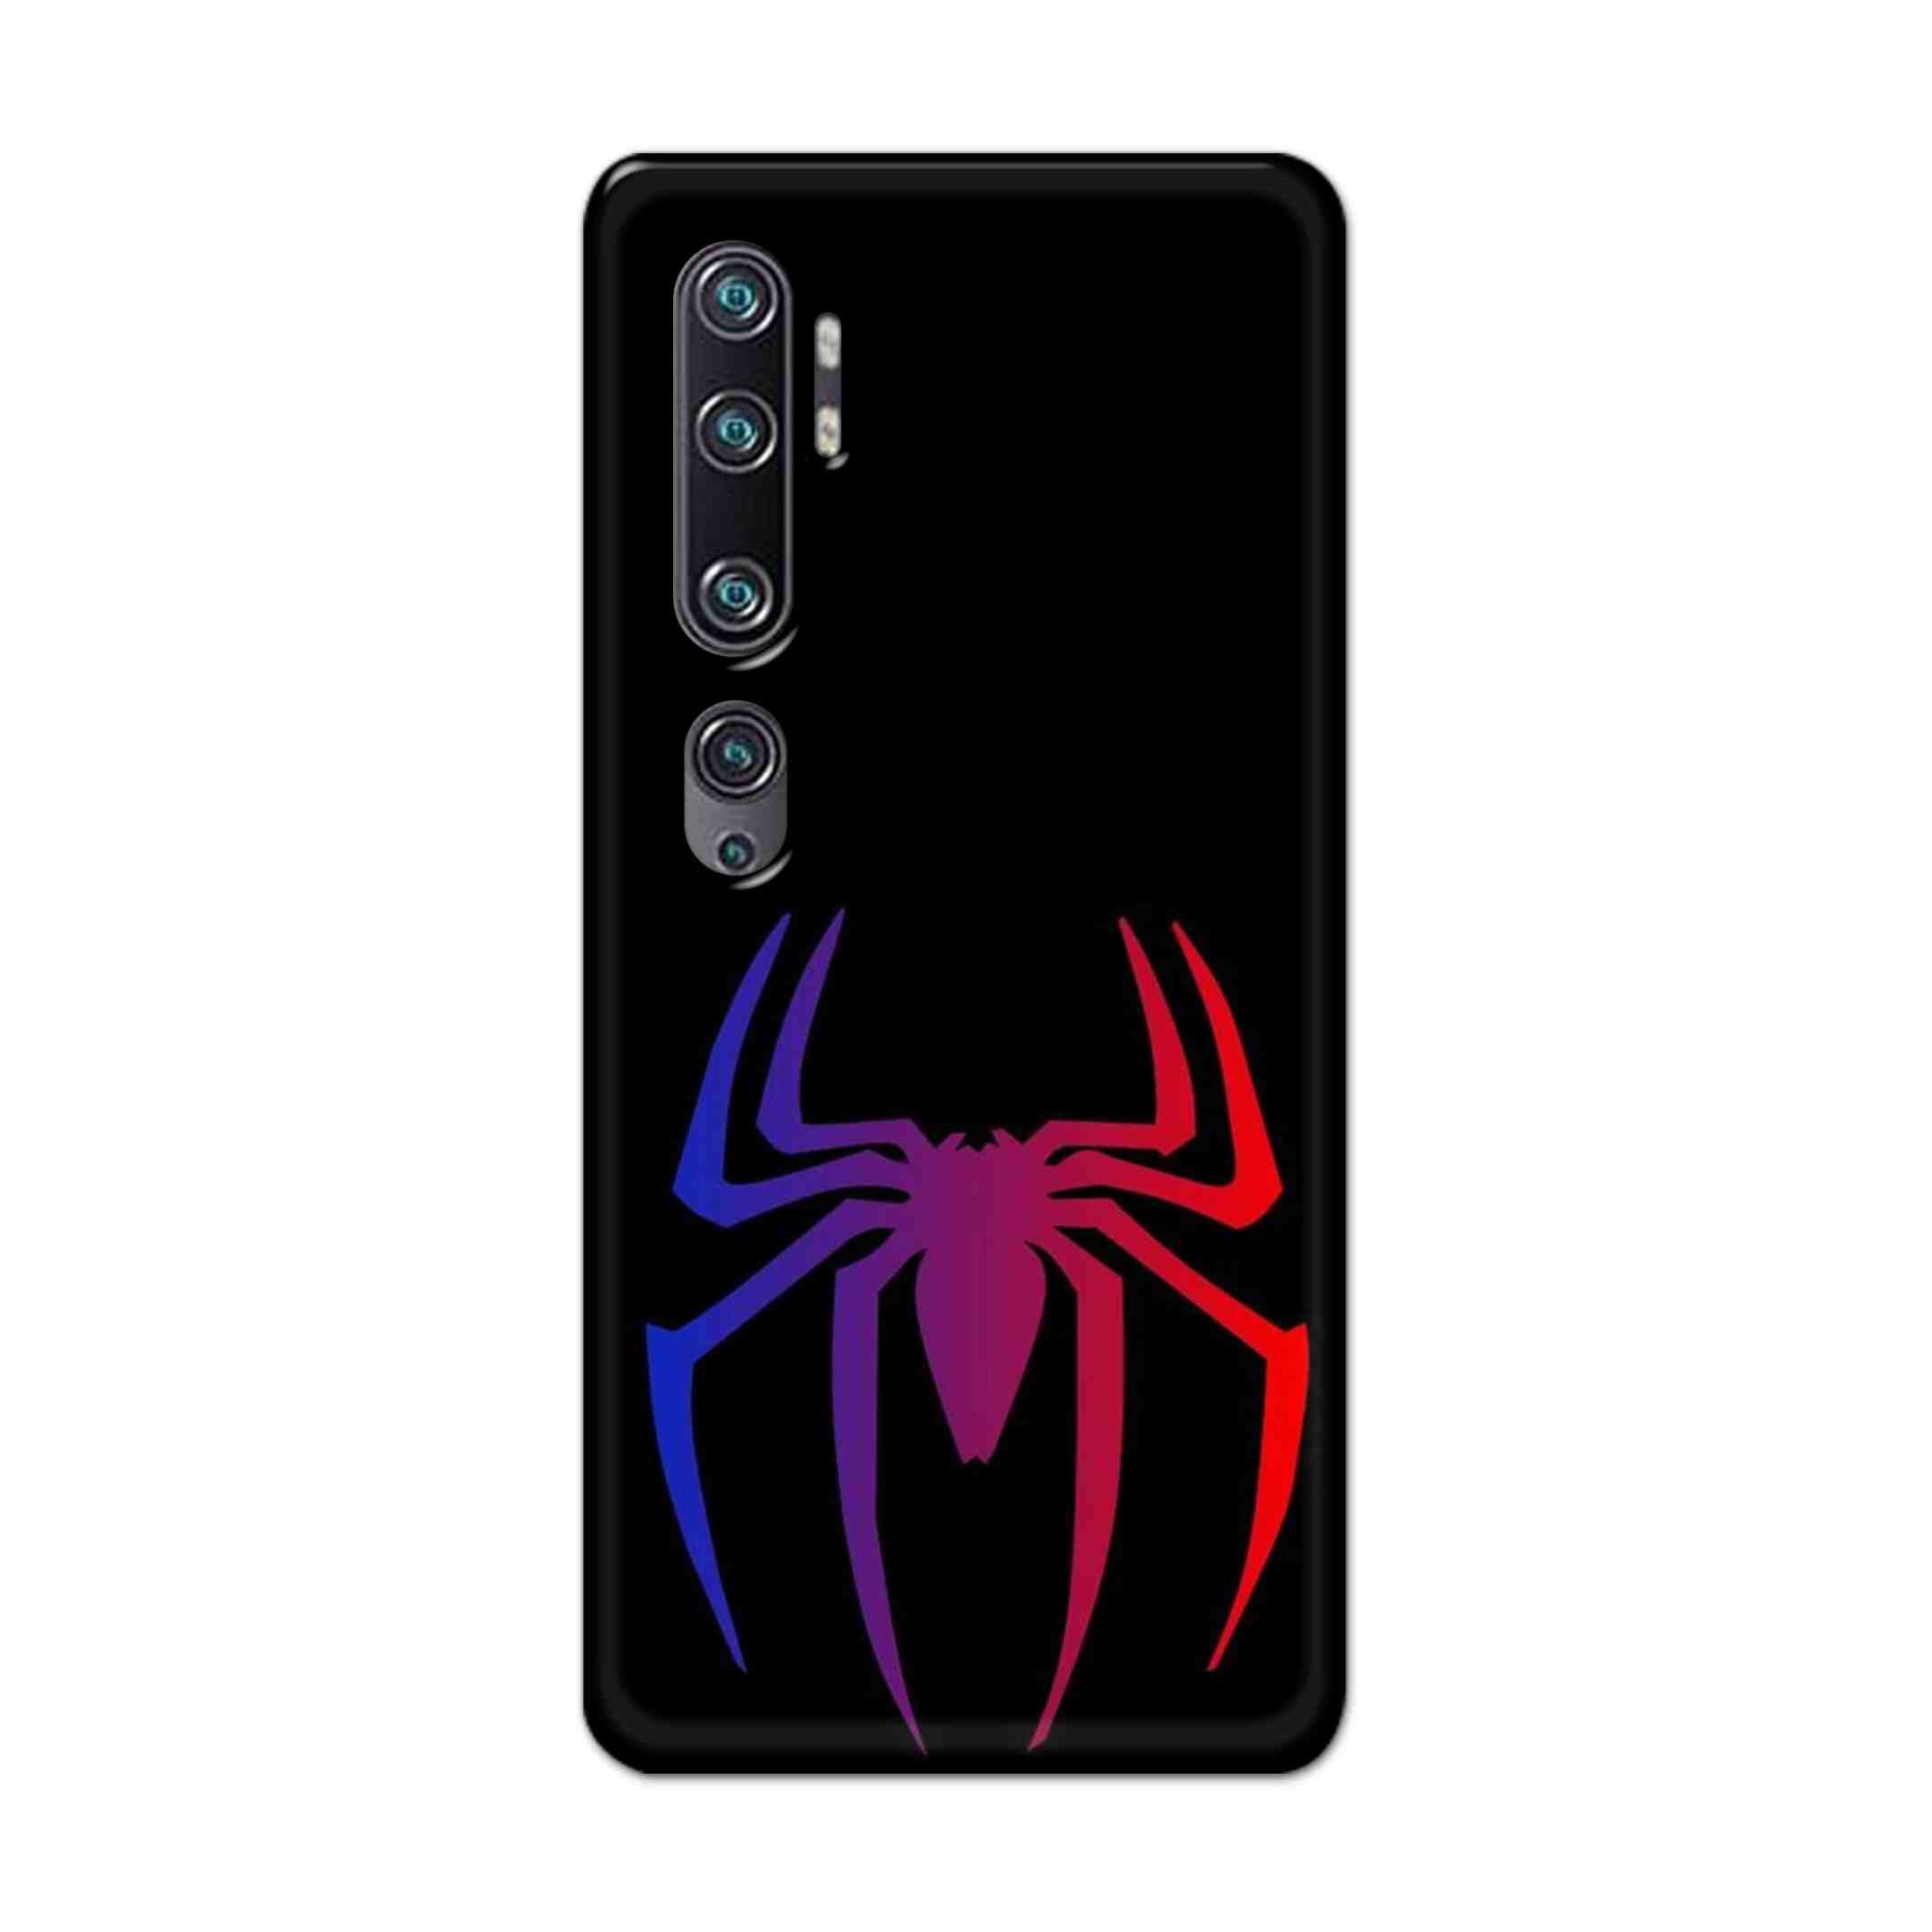 Buy Neon Spiderman Logo Hard Back Mobile Phone Case Cover For Xiaomi Mi Note 10 Online